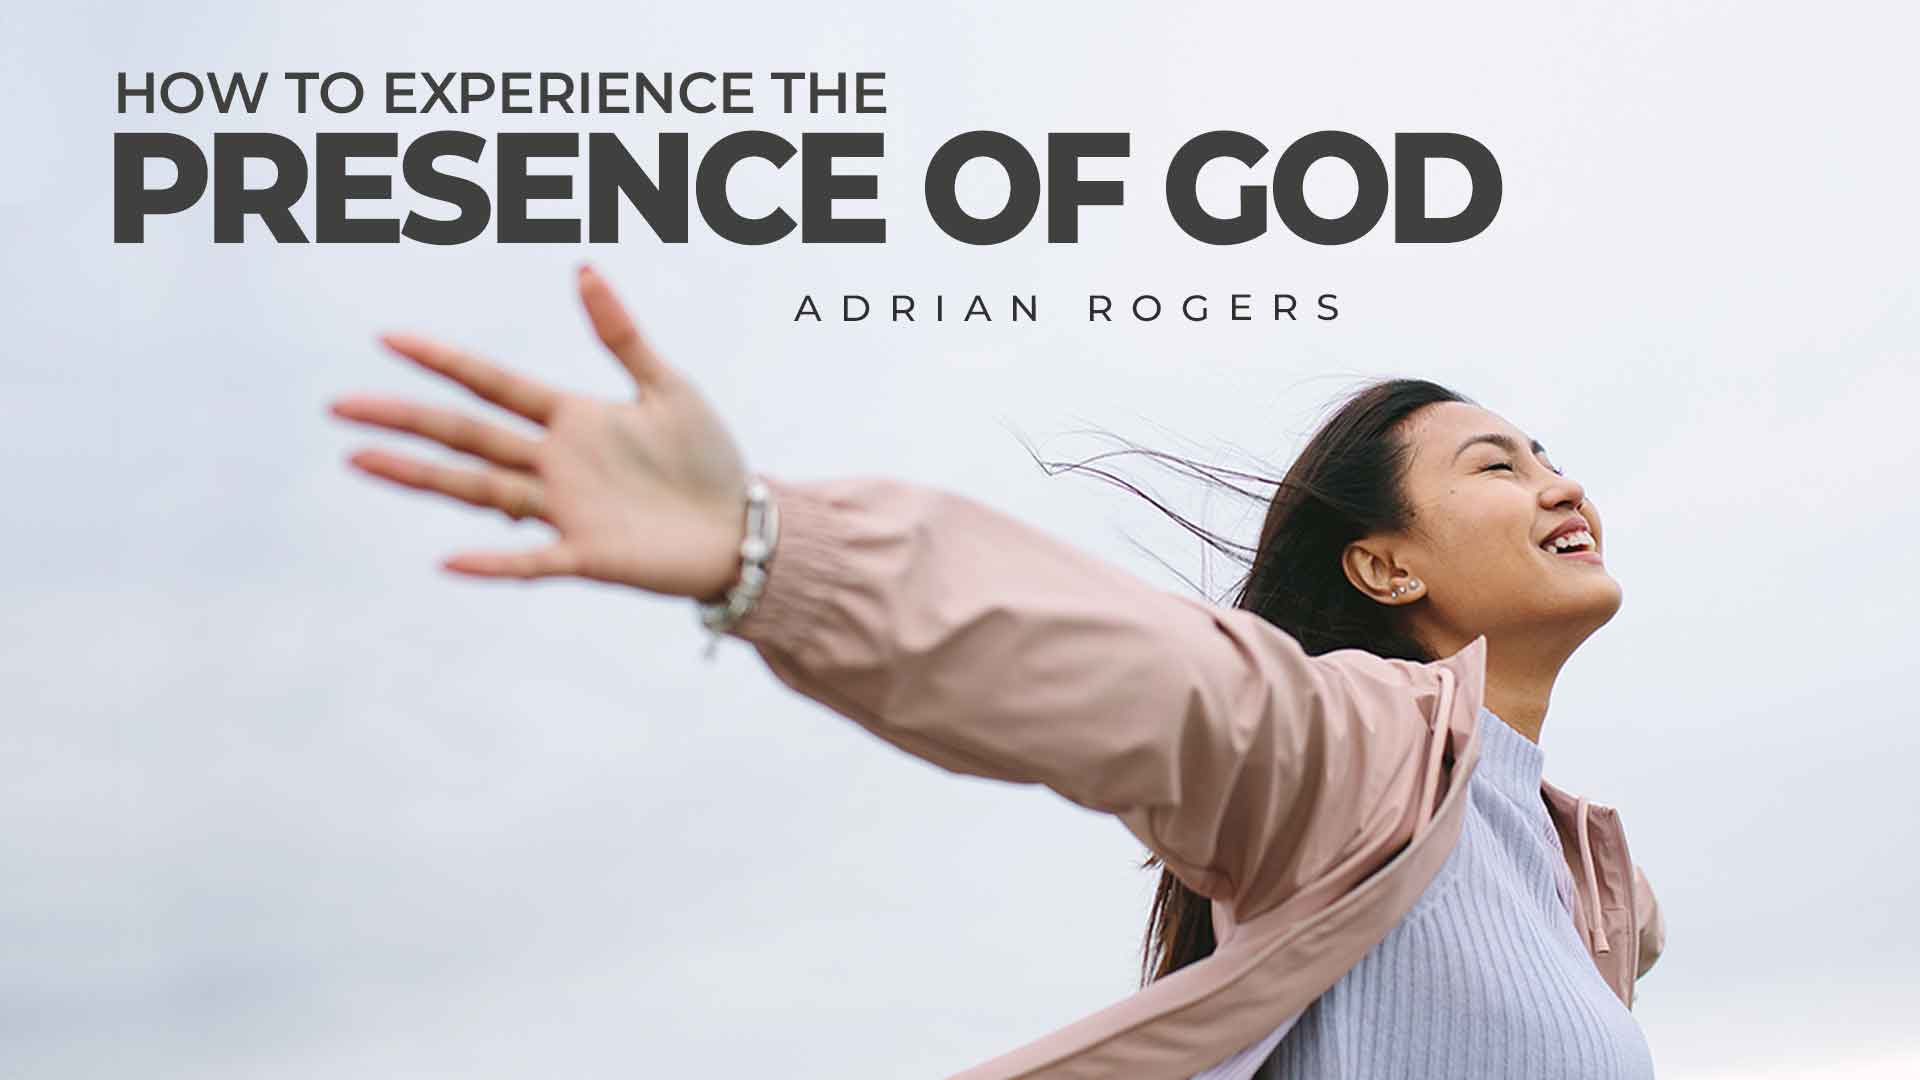 How to Experience the Presence of God 1920x1080